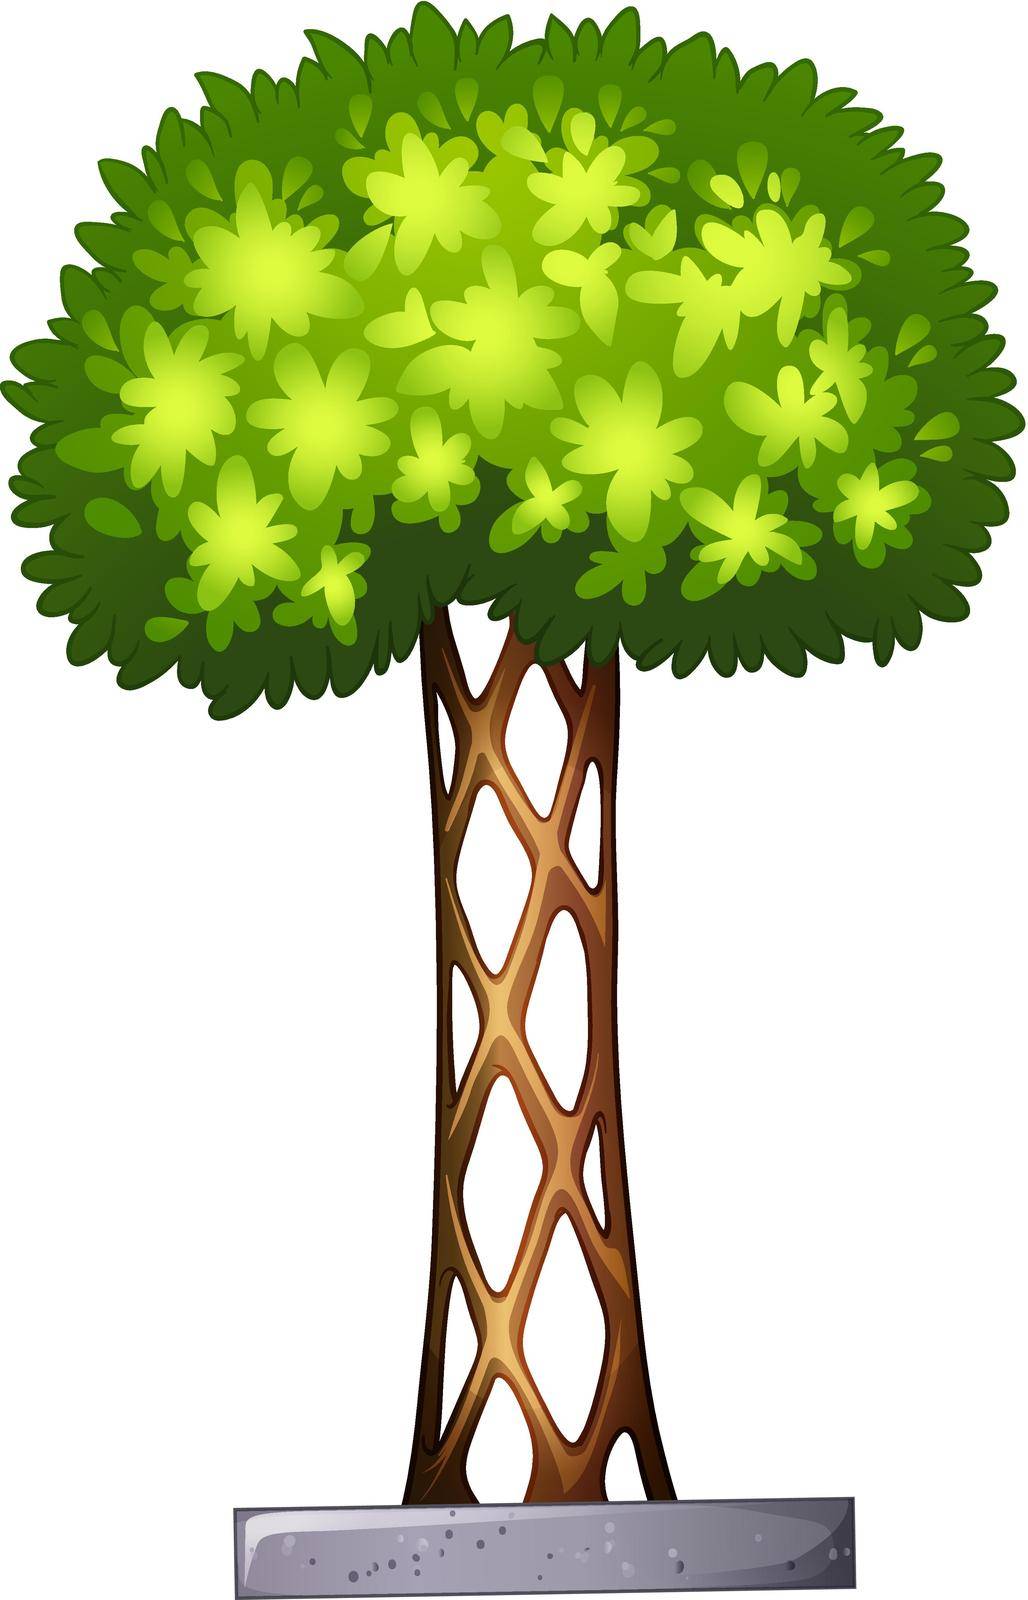 Illustration of a landscaping plant on a white background